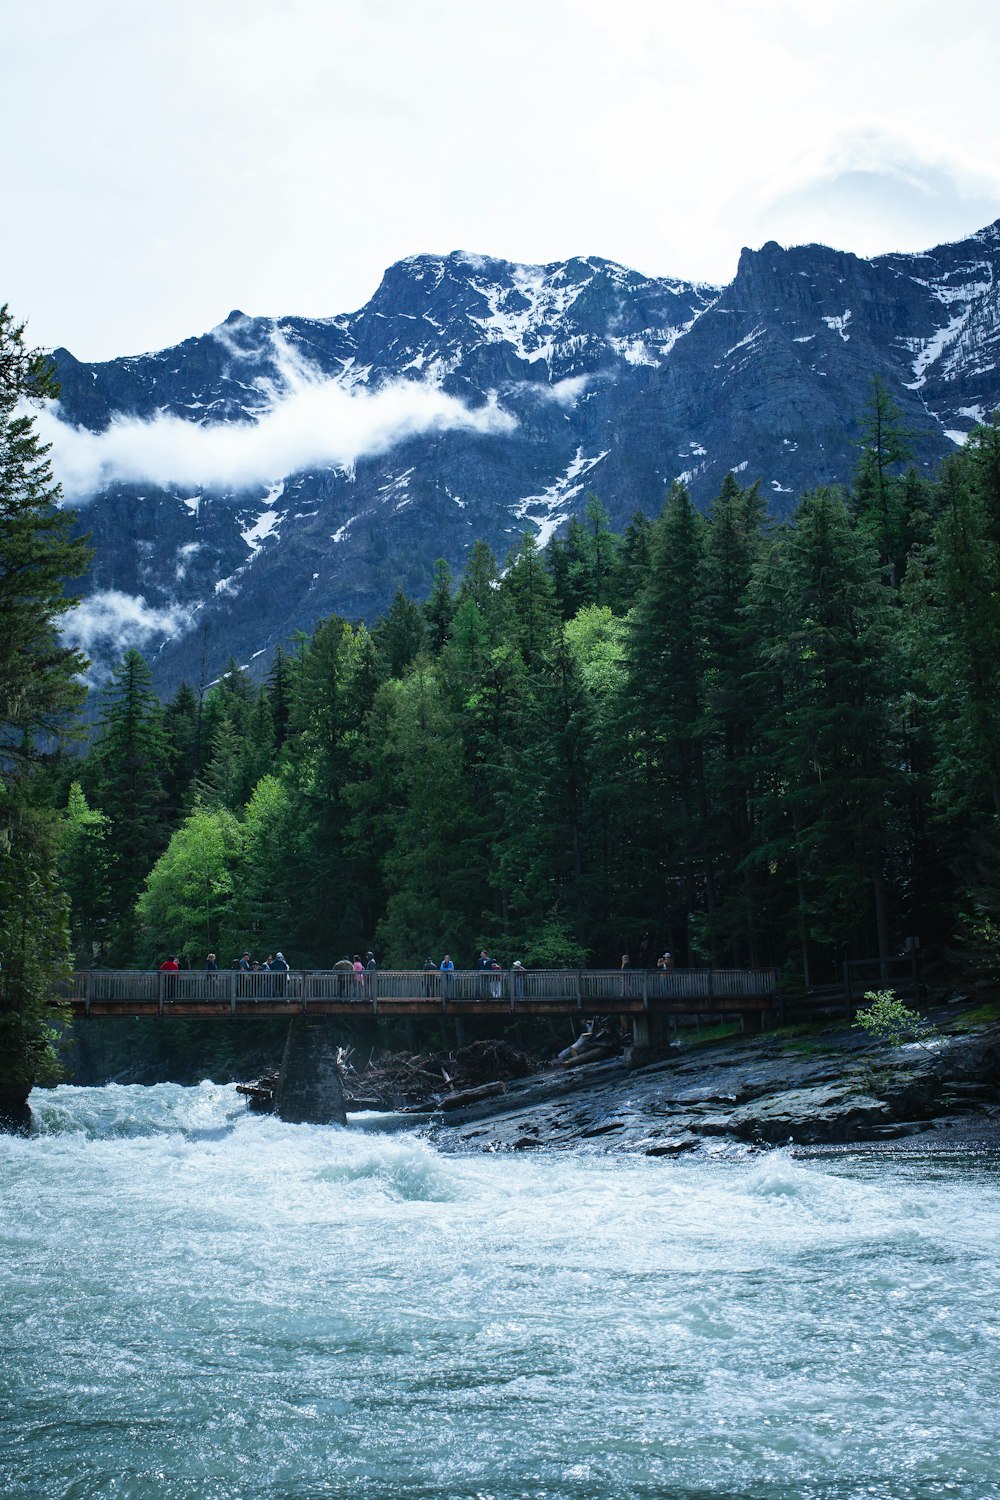 a bridge over a river with trees and mountains in the background